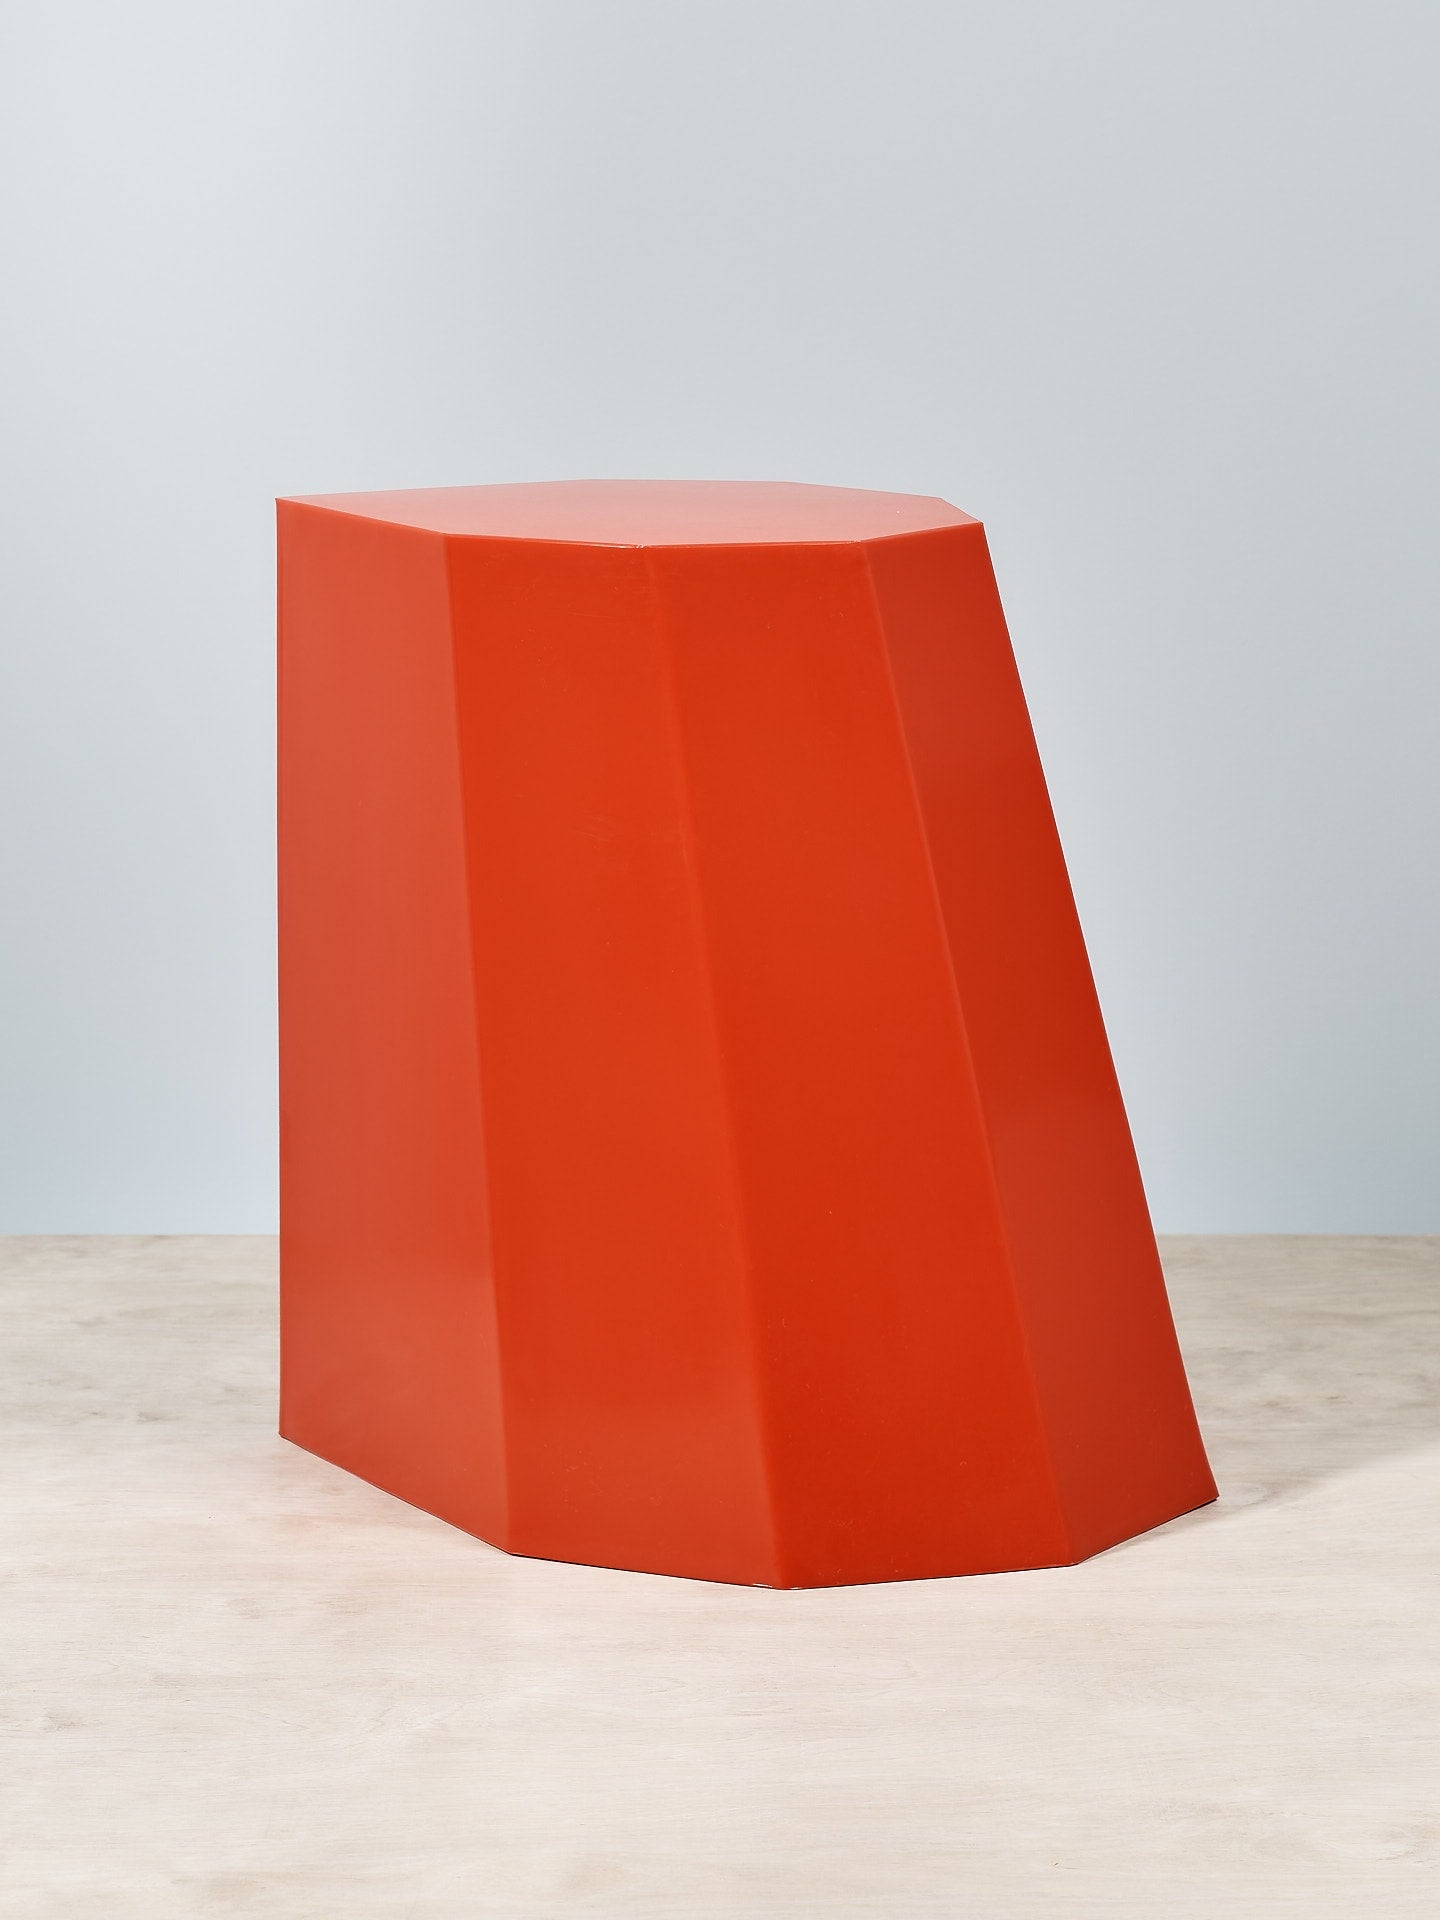 An Arnold Circus Stool - Red by Martino Gamper on a wooden floor.